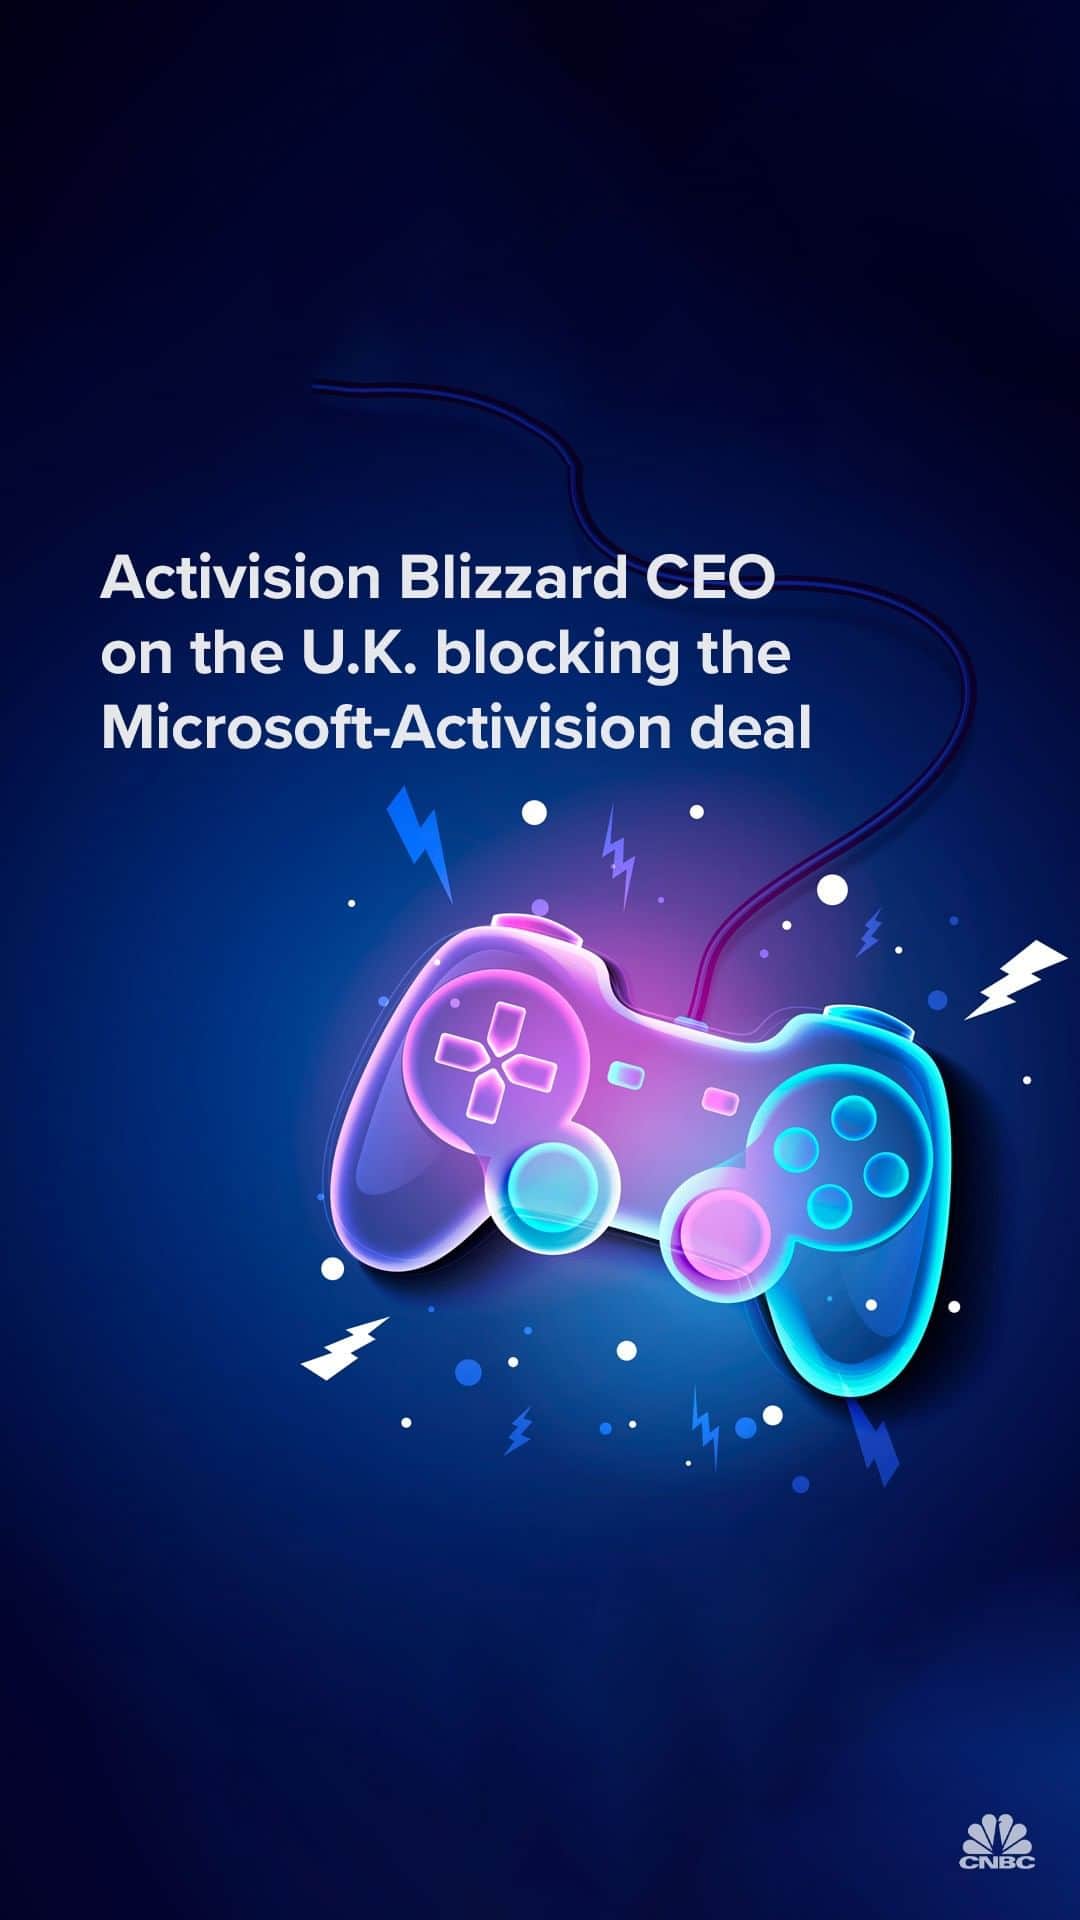 CNBCのインスタグラム：「Activision Blizzard CEO Bobby Kotick on Thursday weighed in after the U.K. blocked Microsoft’s Activision deal: “It was just a flawed ruling in every respect.”   Britain's top competition regulator on Wednesday moved to block Microsoft's acquisition of the video game publisher. The measure marks a major blow for Microsoft, as it seeks to convince authorities that the deal will benefit competition. Microsoft said it plans to appeal the decision.  Full details: Link in bio.」